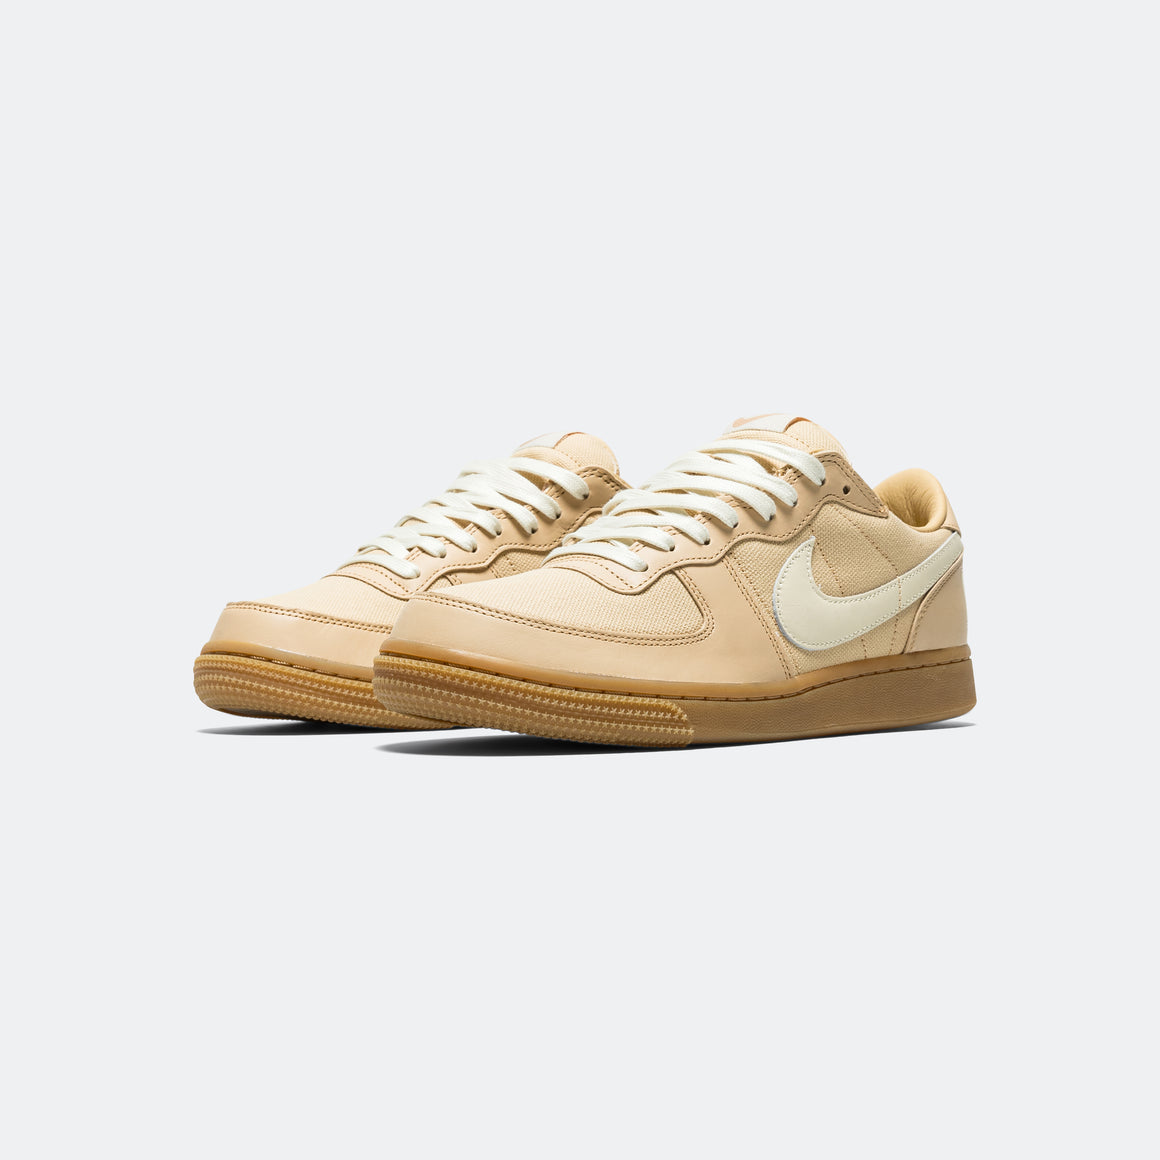 Nike - Terminator Low PRM - Sesame/Coconut Milk - UP THERE